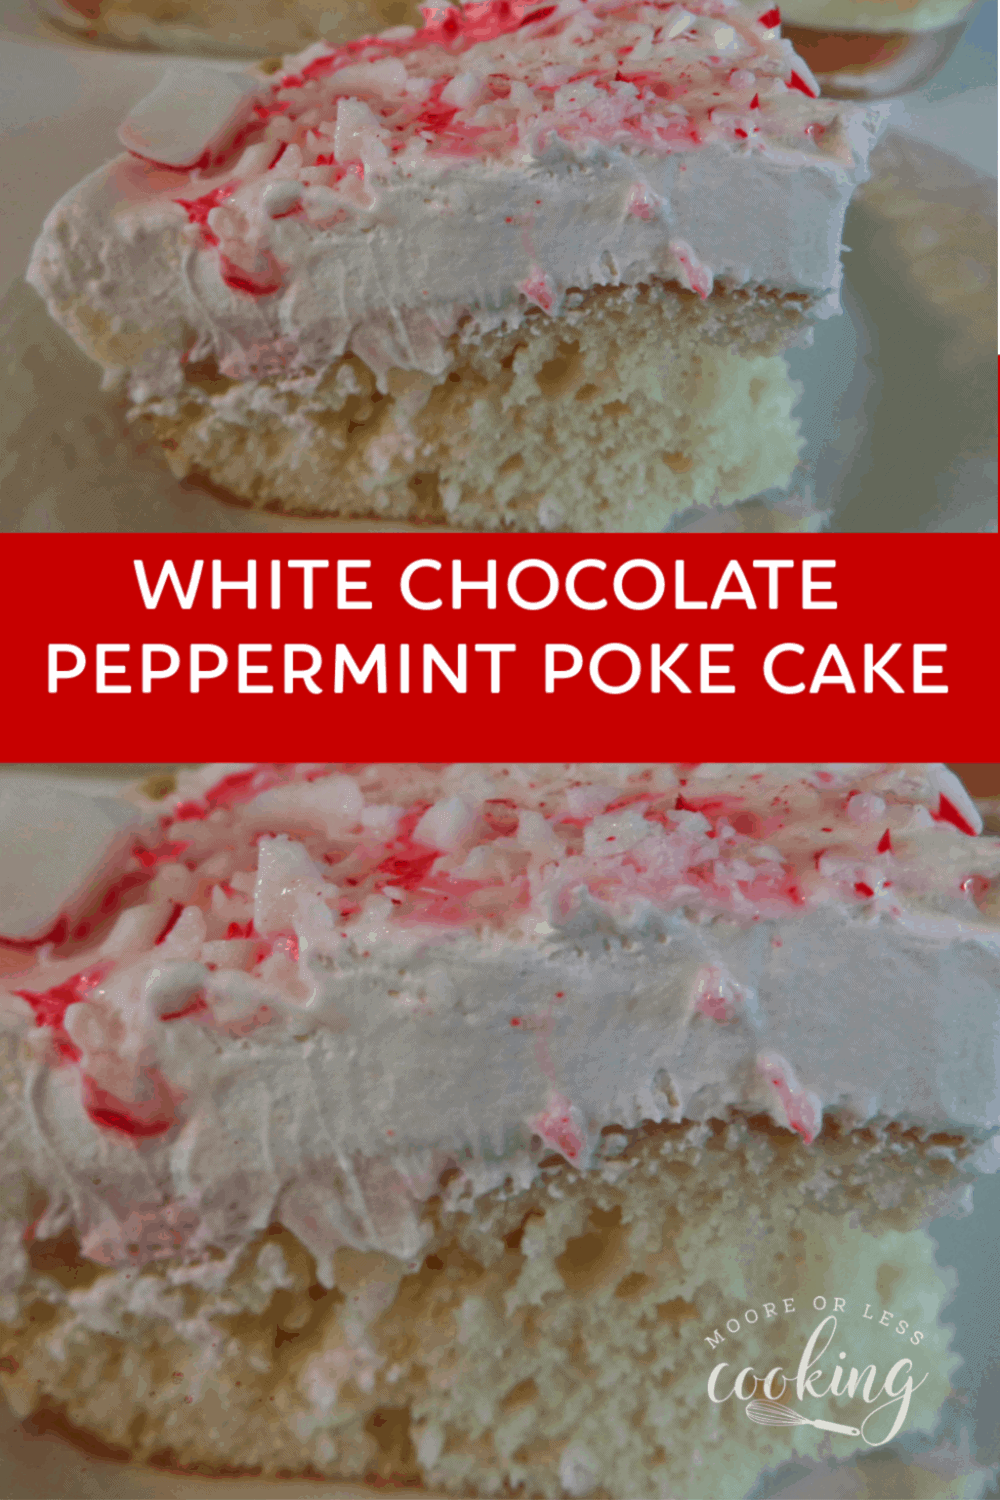 White Chocolate Peppermint Poke Cake For all of the white chocolate Peppermint fans. #whitechocolate #peppermint #pokecake #mooreorlesscooking #whitechocolate #peppermint #pokecake #mooreorlesscooking via @Mooreorlesscook